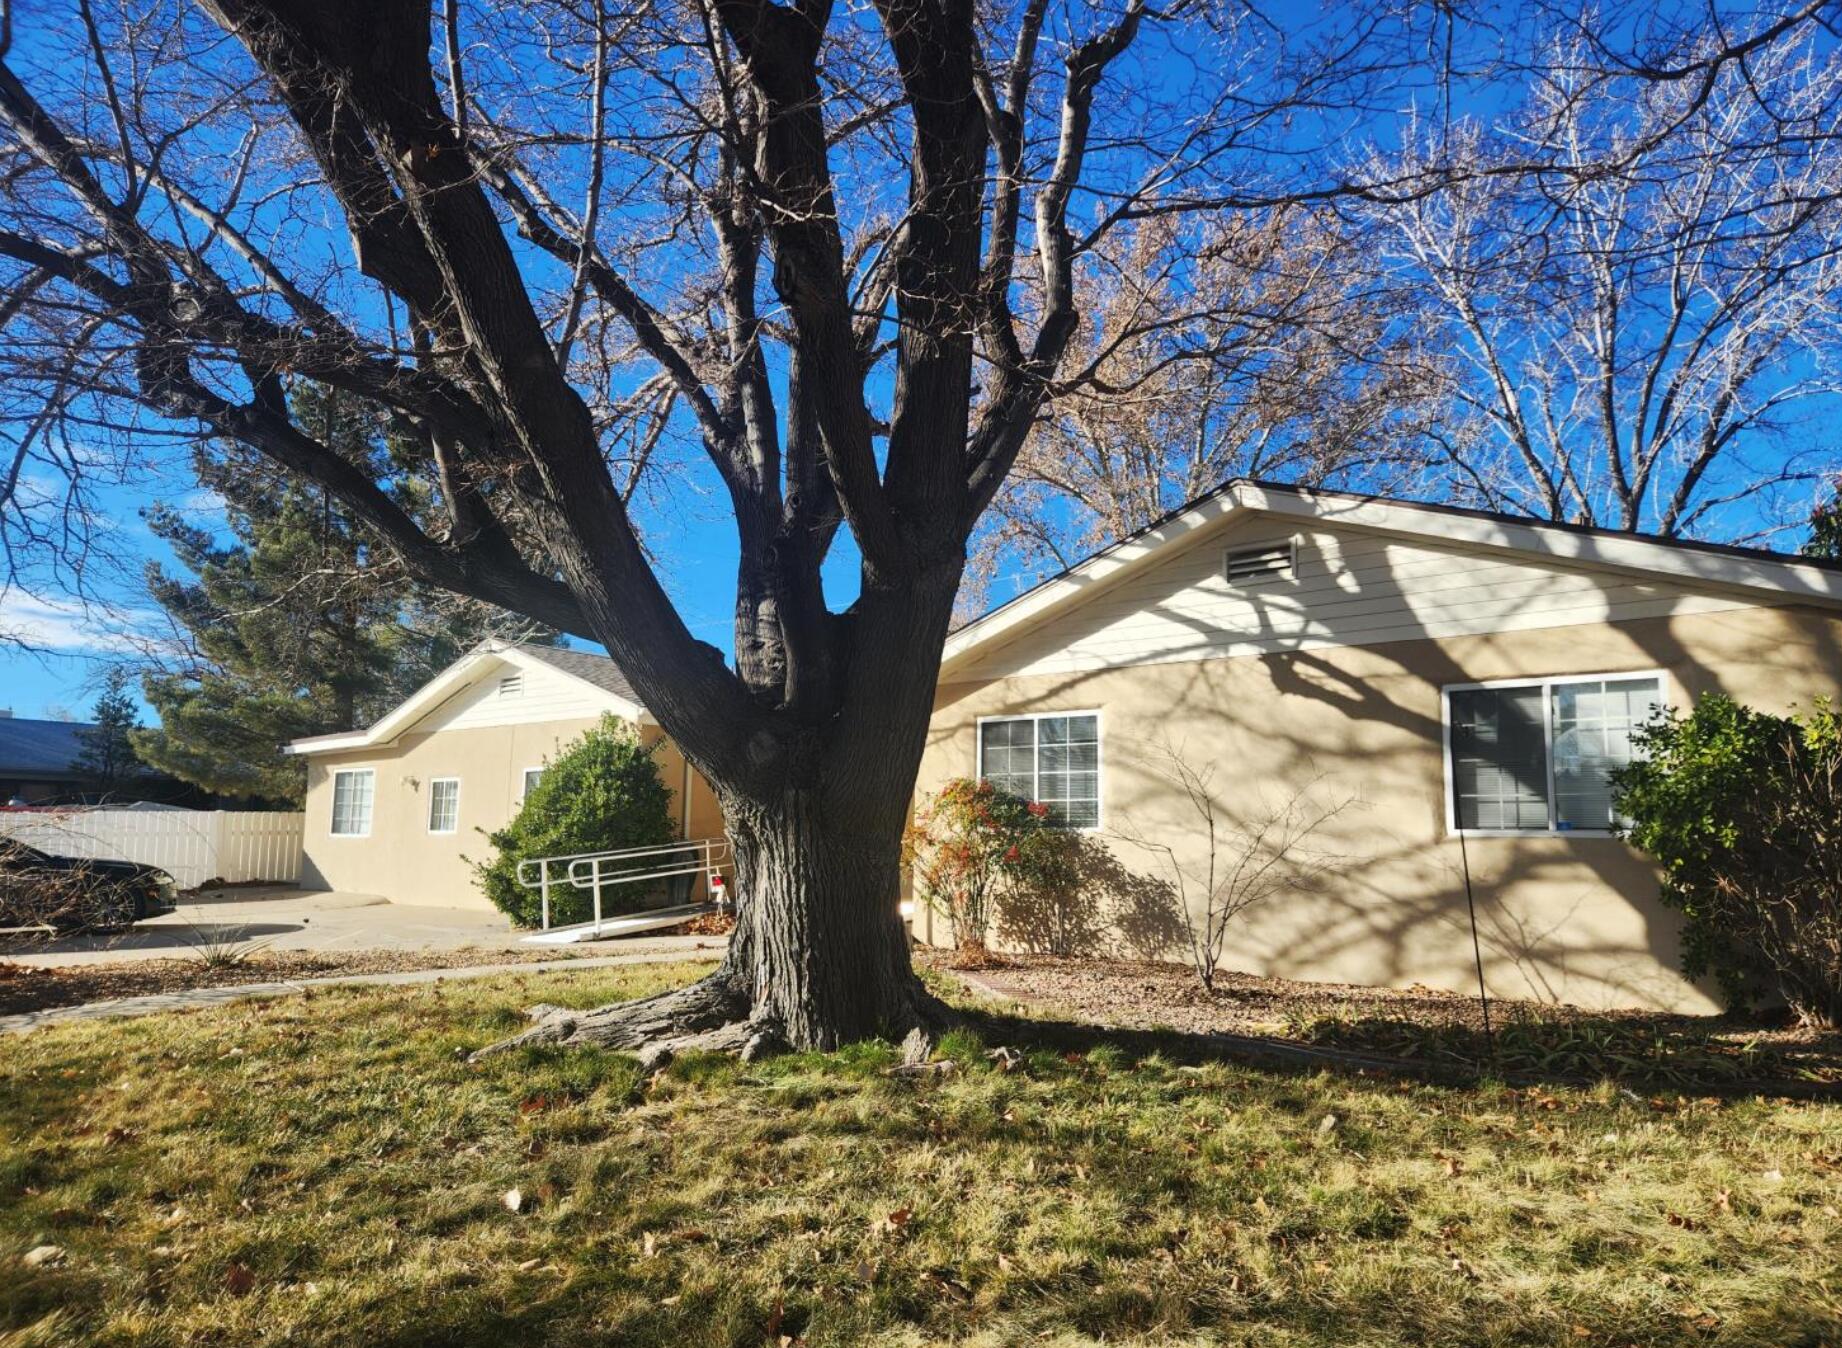 Seven bedroom house with 2 and a half baths, 2 living areas, large kitchen and dining situated in prime Northeast Heights location. Yard has wheelchair ramp, two patios, fruit trees, storage, and more in this lovely Mossman Home built in 1958.